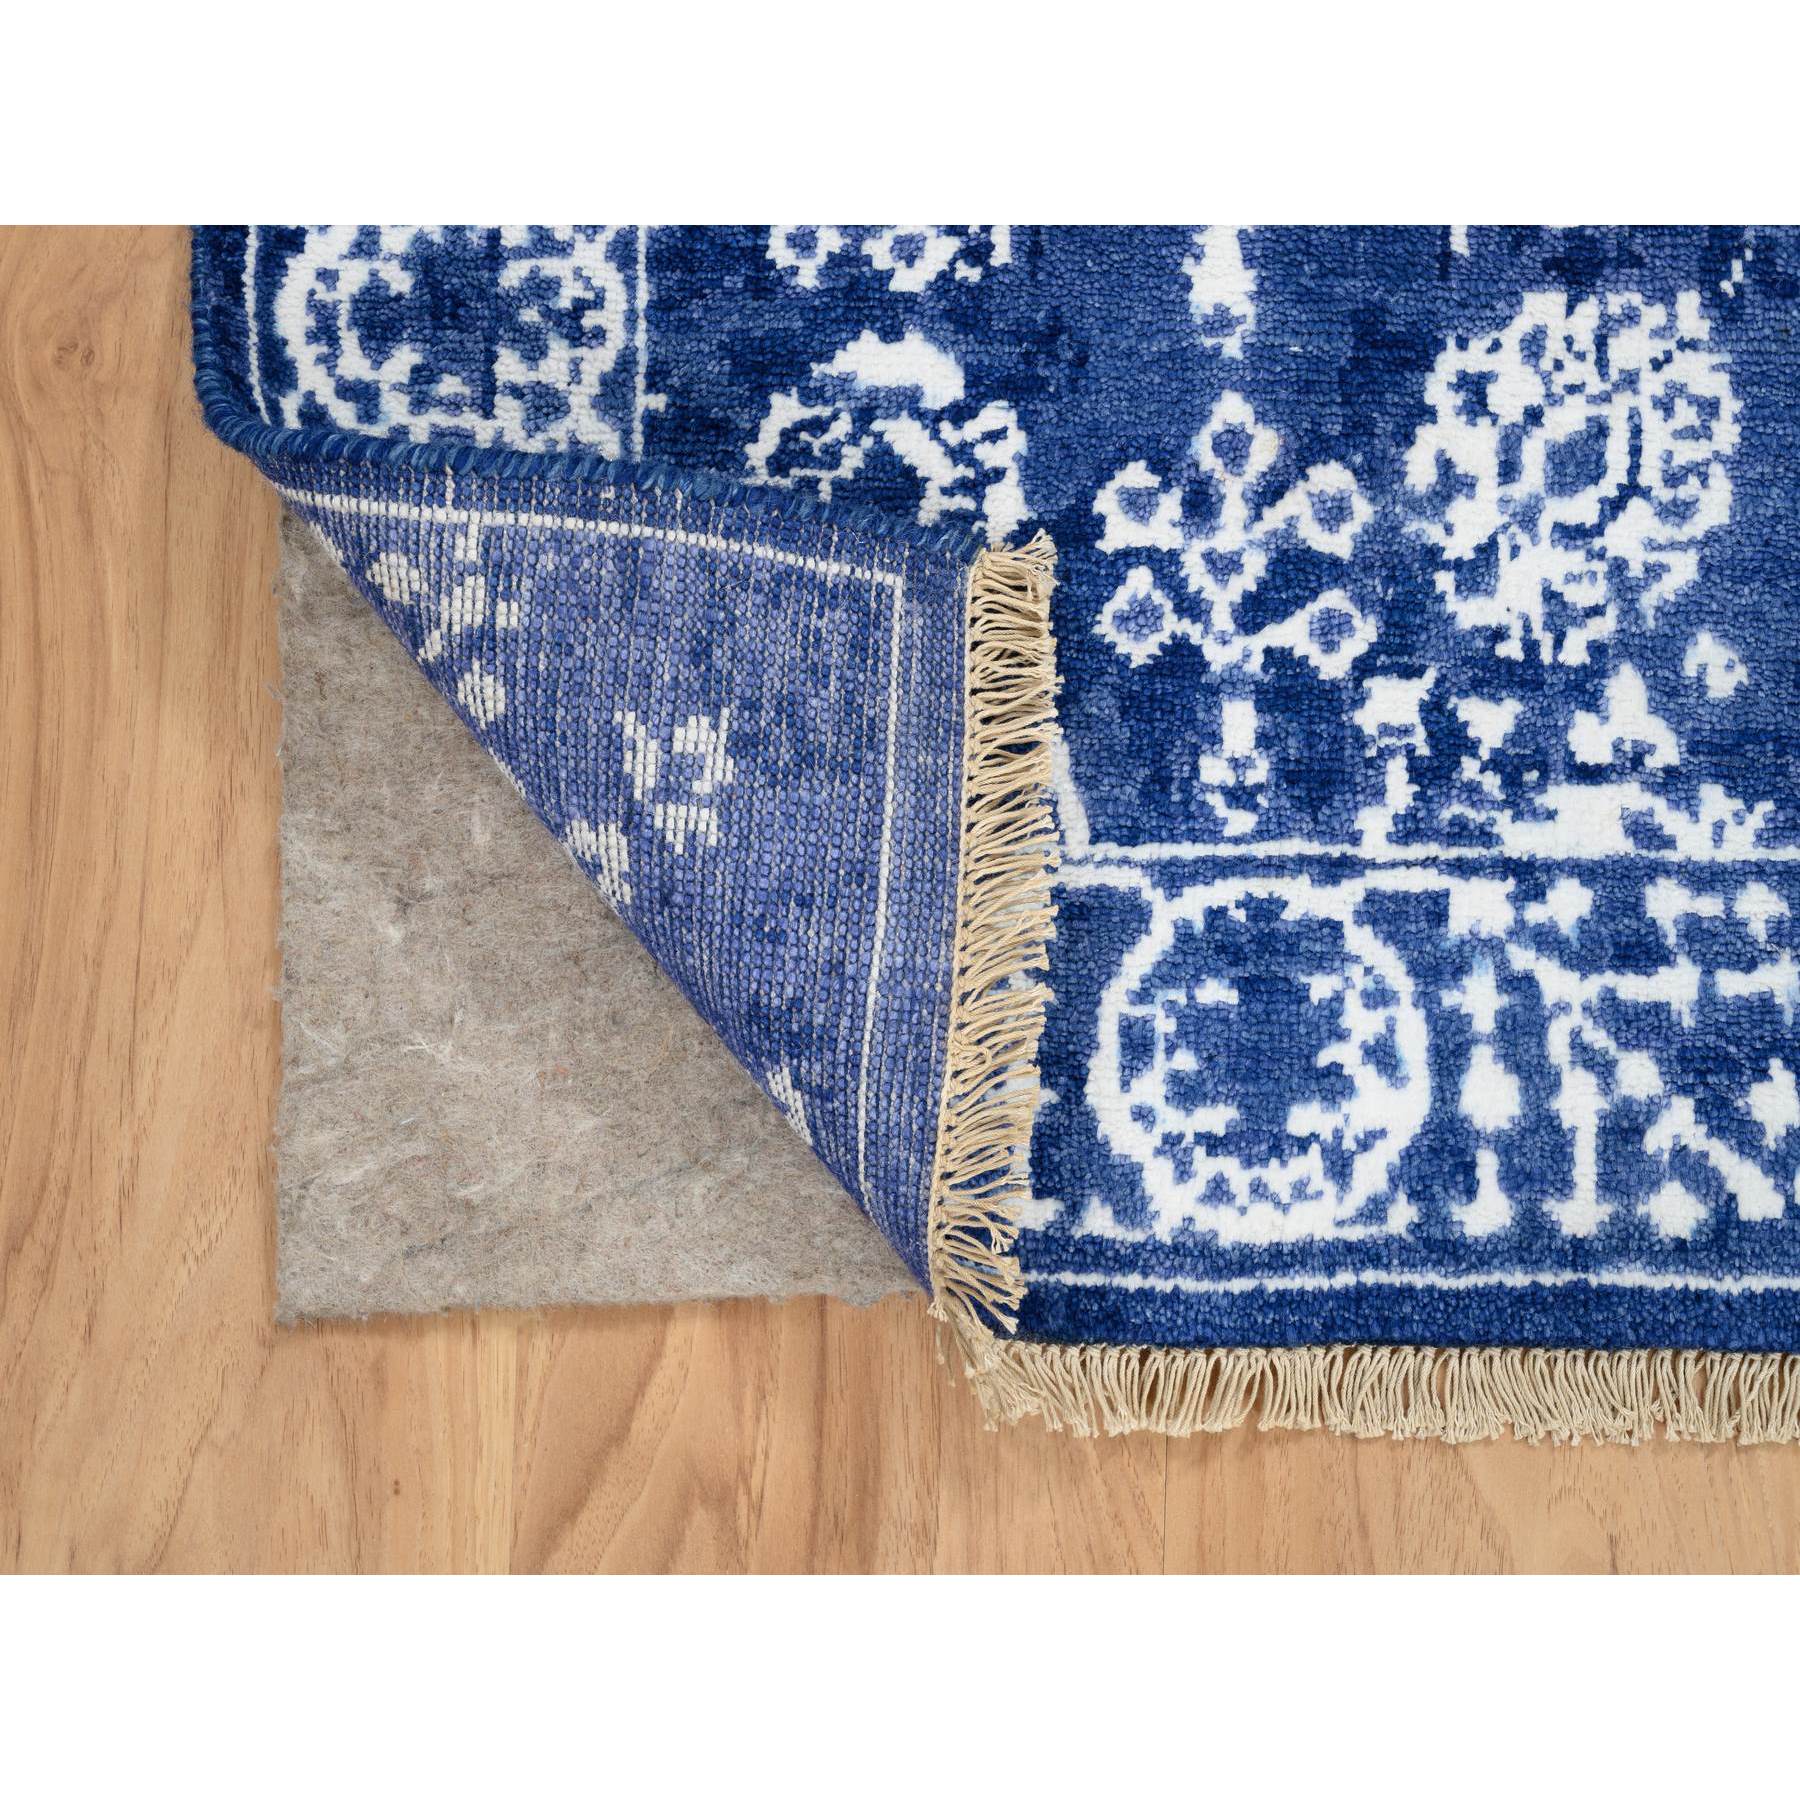 2'x3' Denim Blue, Tebraz with All Over Motifs Tone on Tone, Wool and Silk Hand Woven, Mat Oriental Rug 